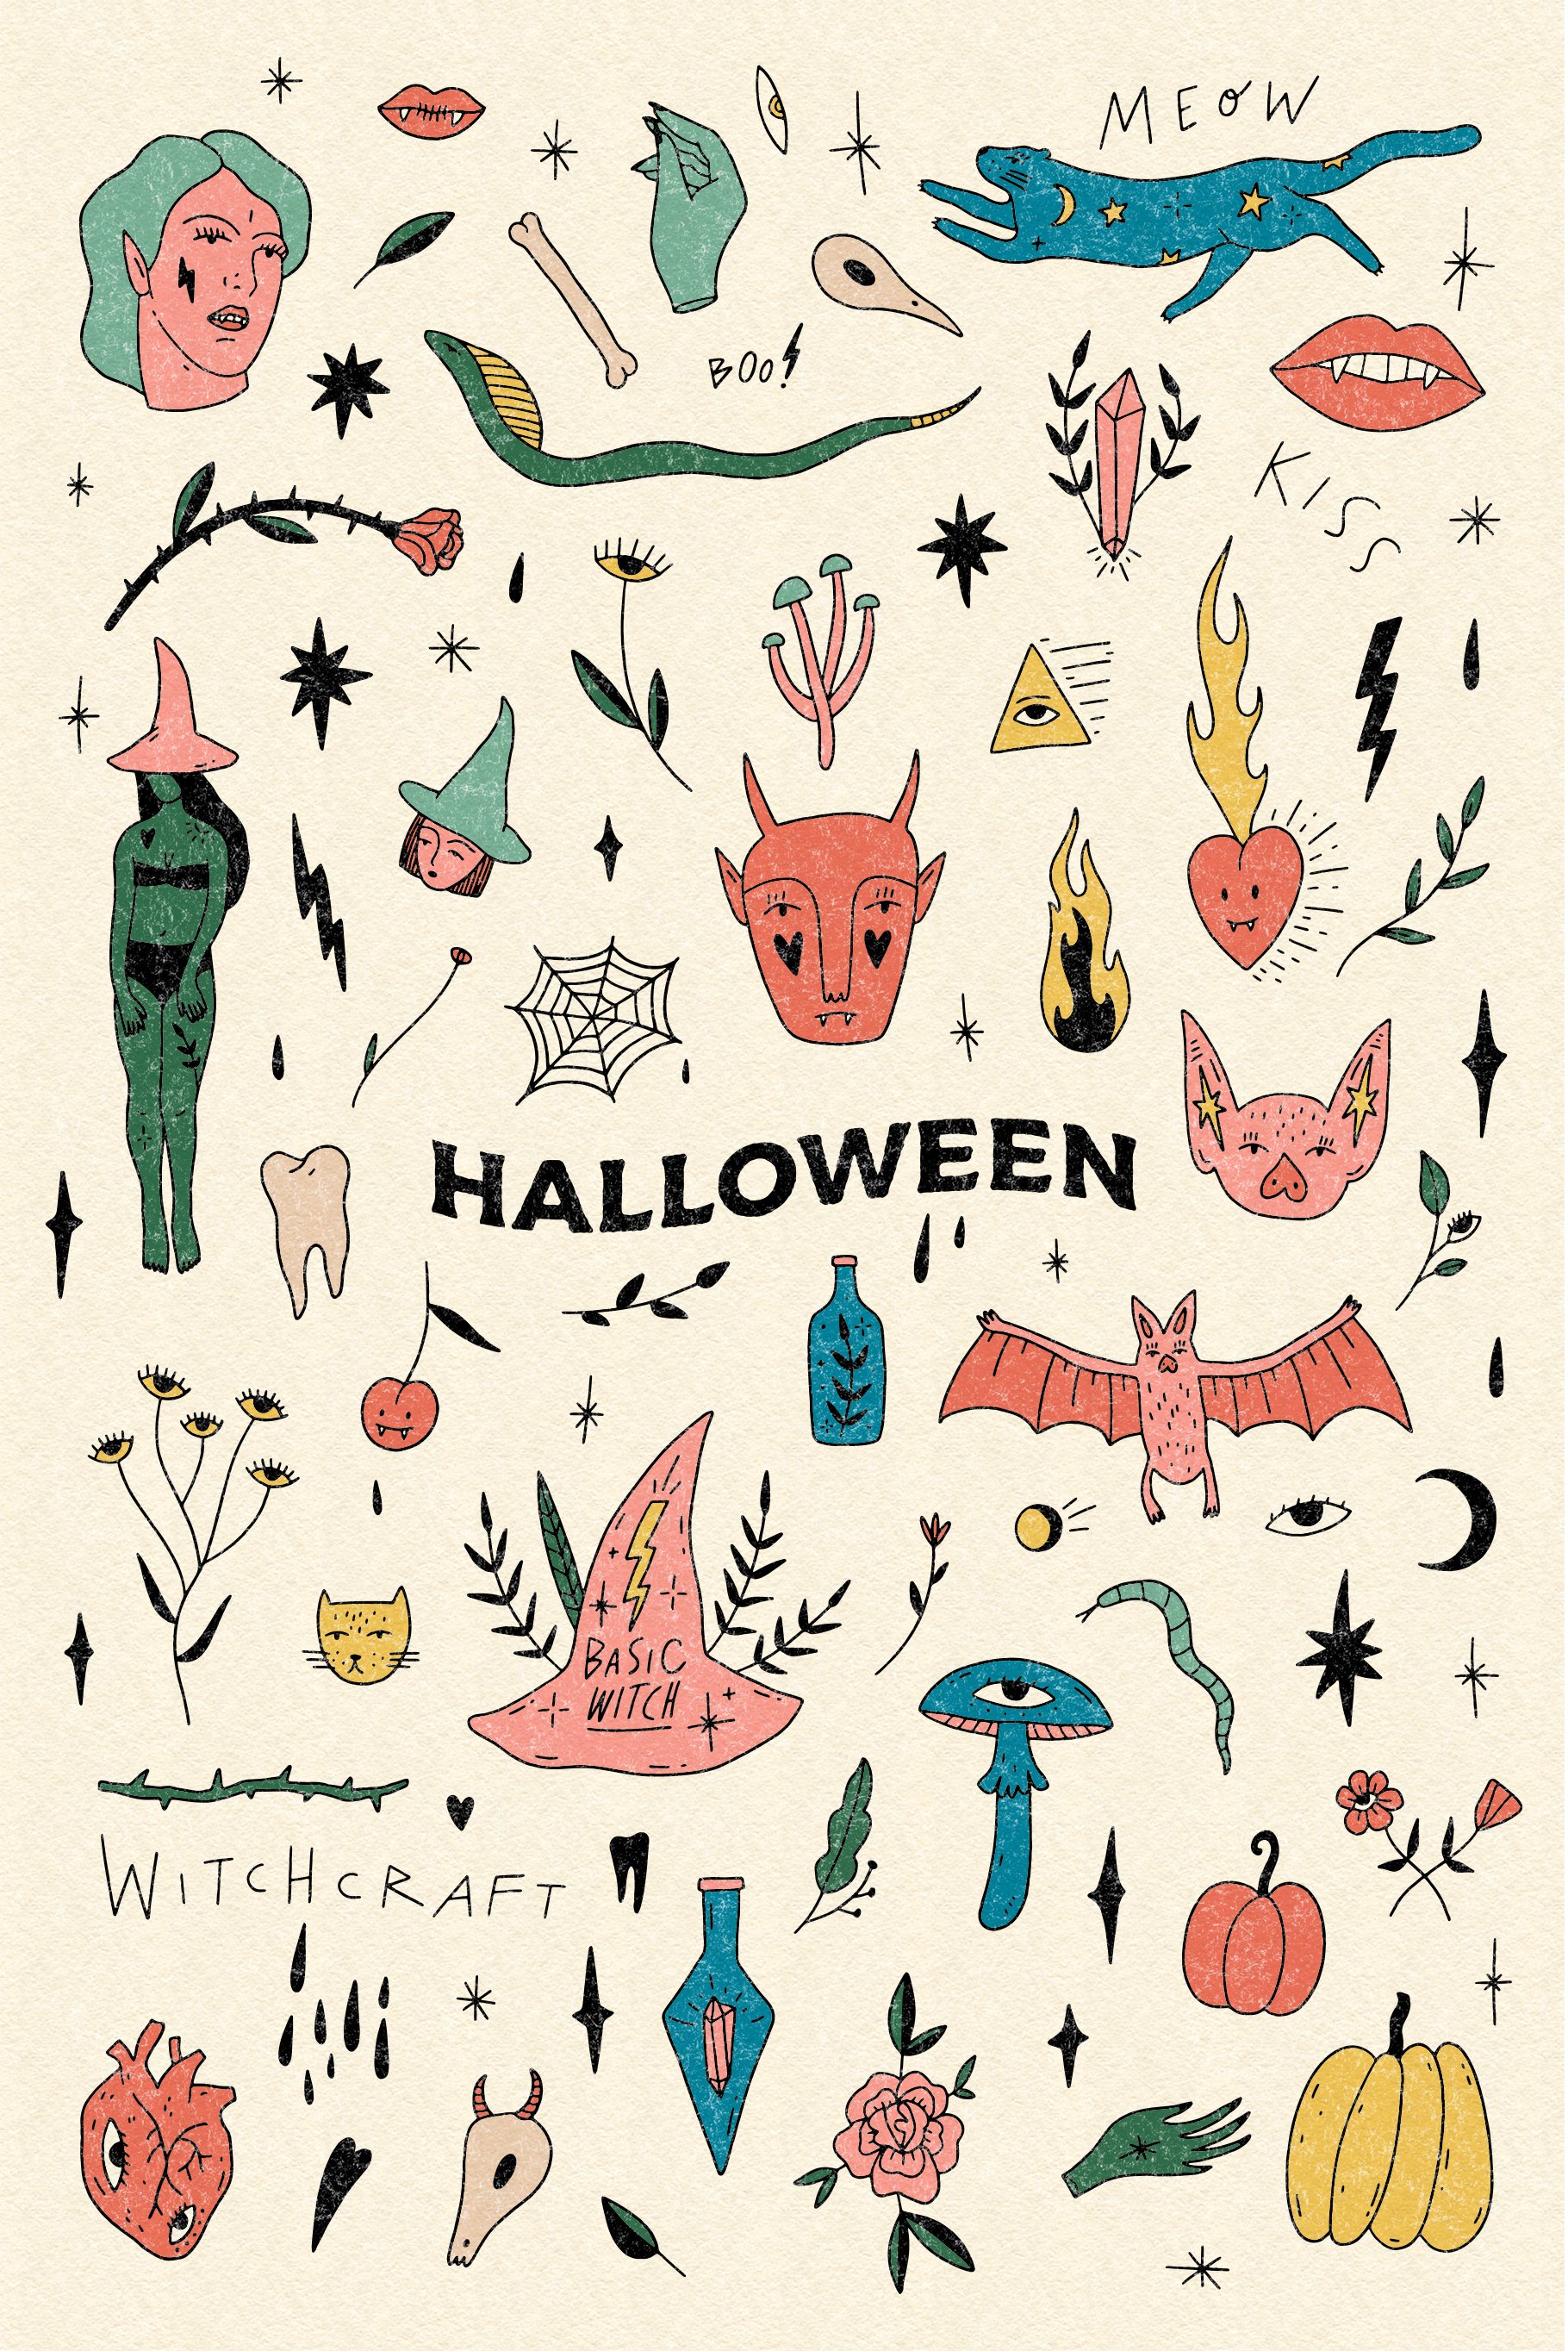 Colorful Halloween elements.